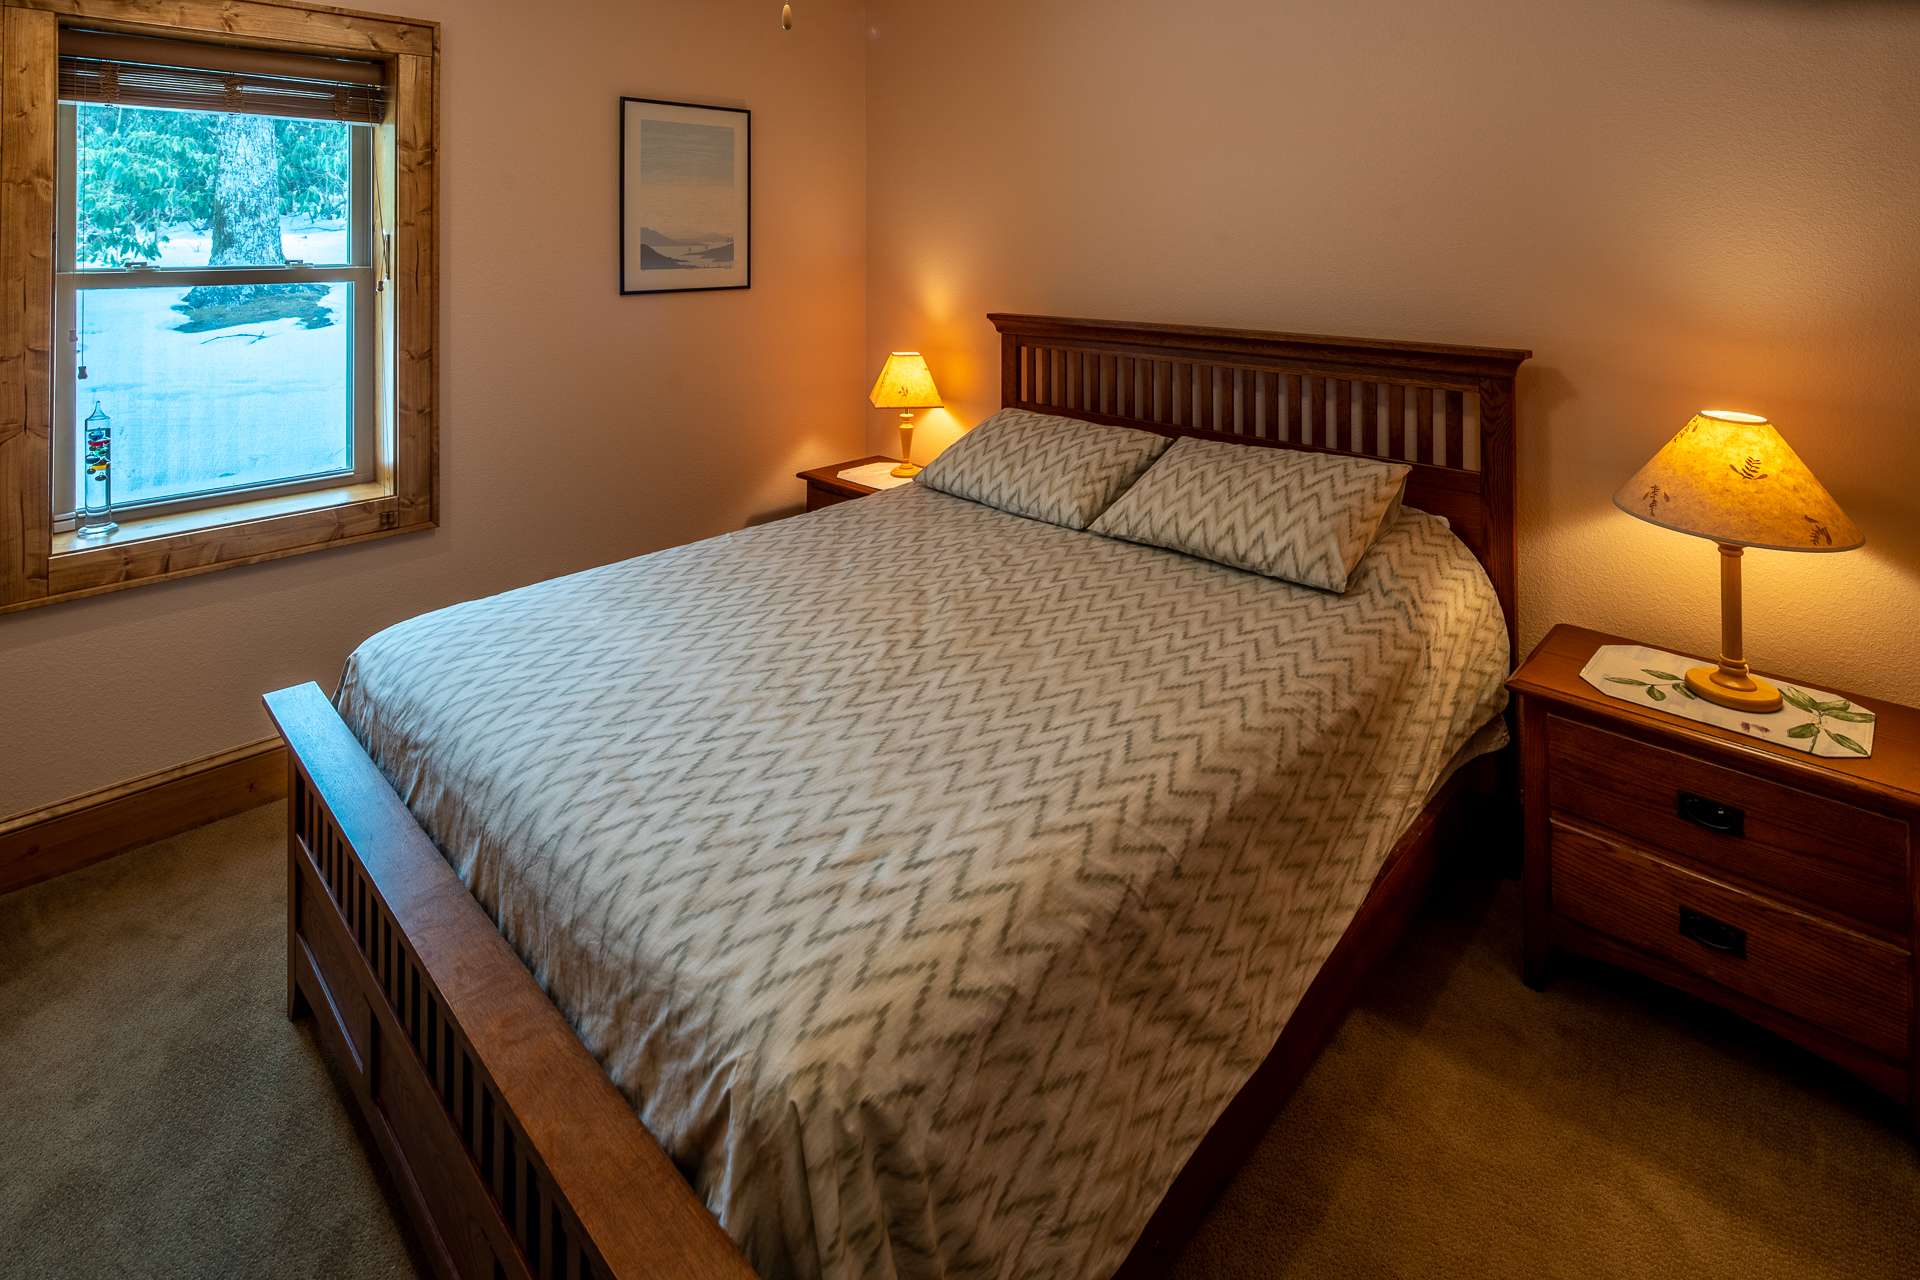 Both bedrooms feature comfortable carpeted floors.